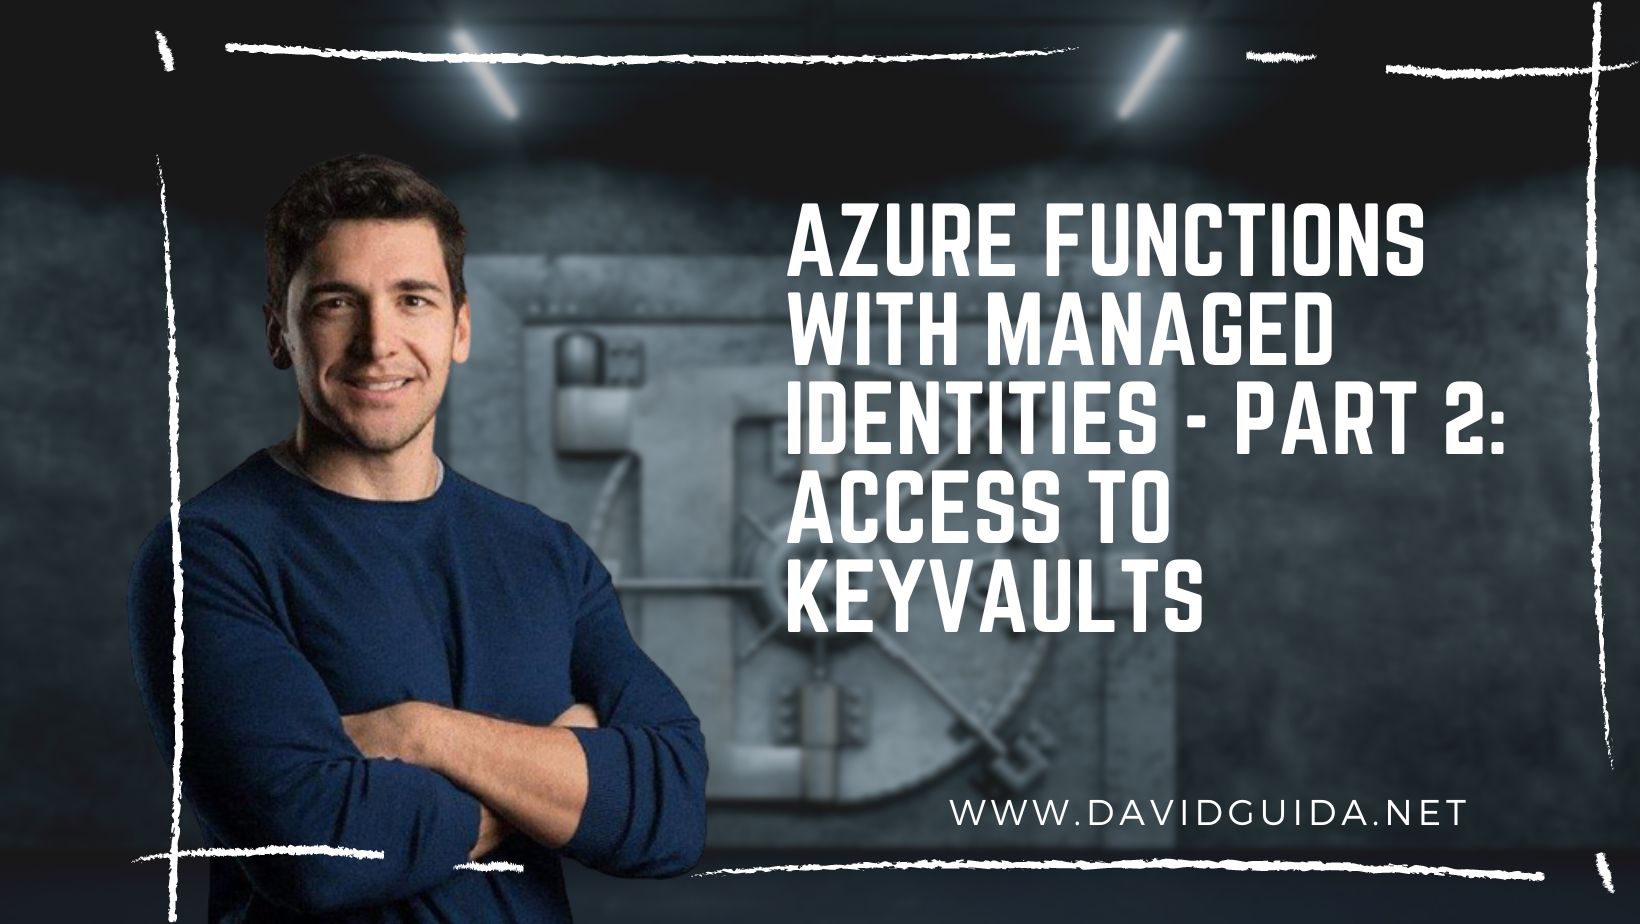 Azure Functions with Managed Identities - Part 2: access to KeyVaults